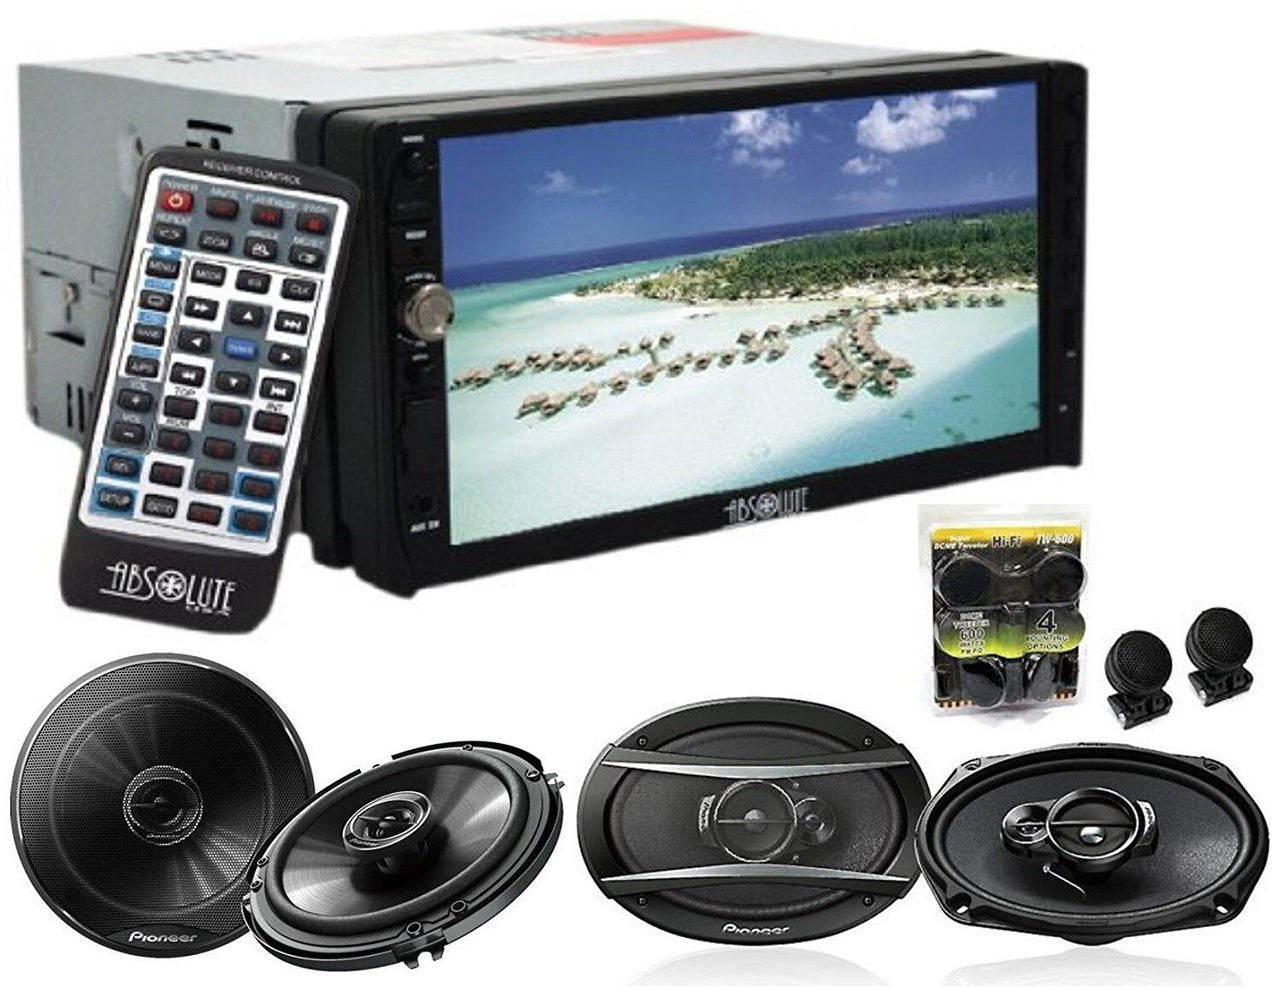 Absolute DD-3000 7-Inch Double Din Multimedia DVD Player With pioneer TS-G1620F 6.5" TS-G6930F 6x9" Speakers And Free Absolute TW600 Tweeter